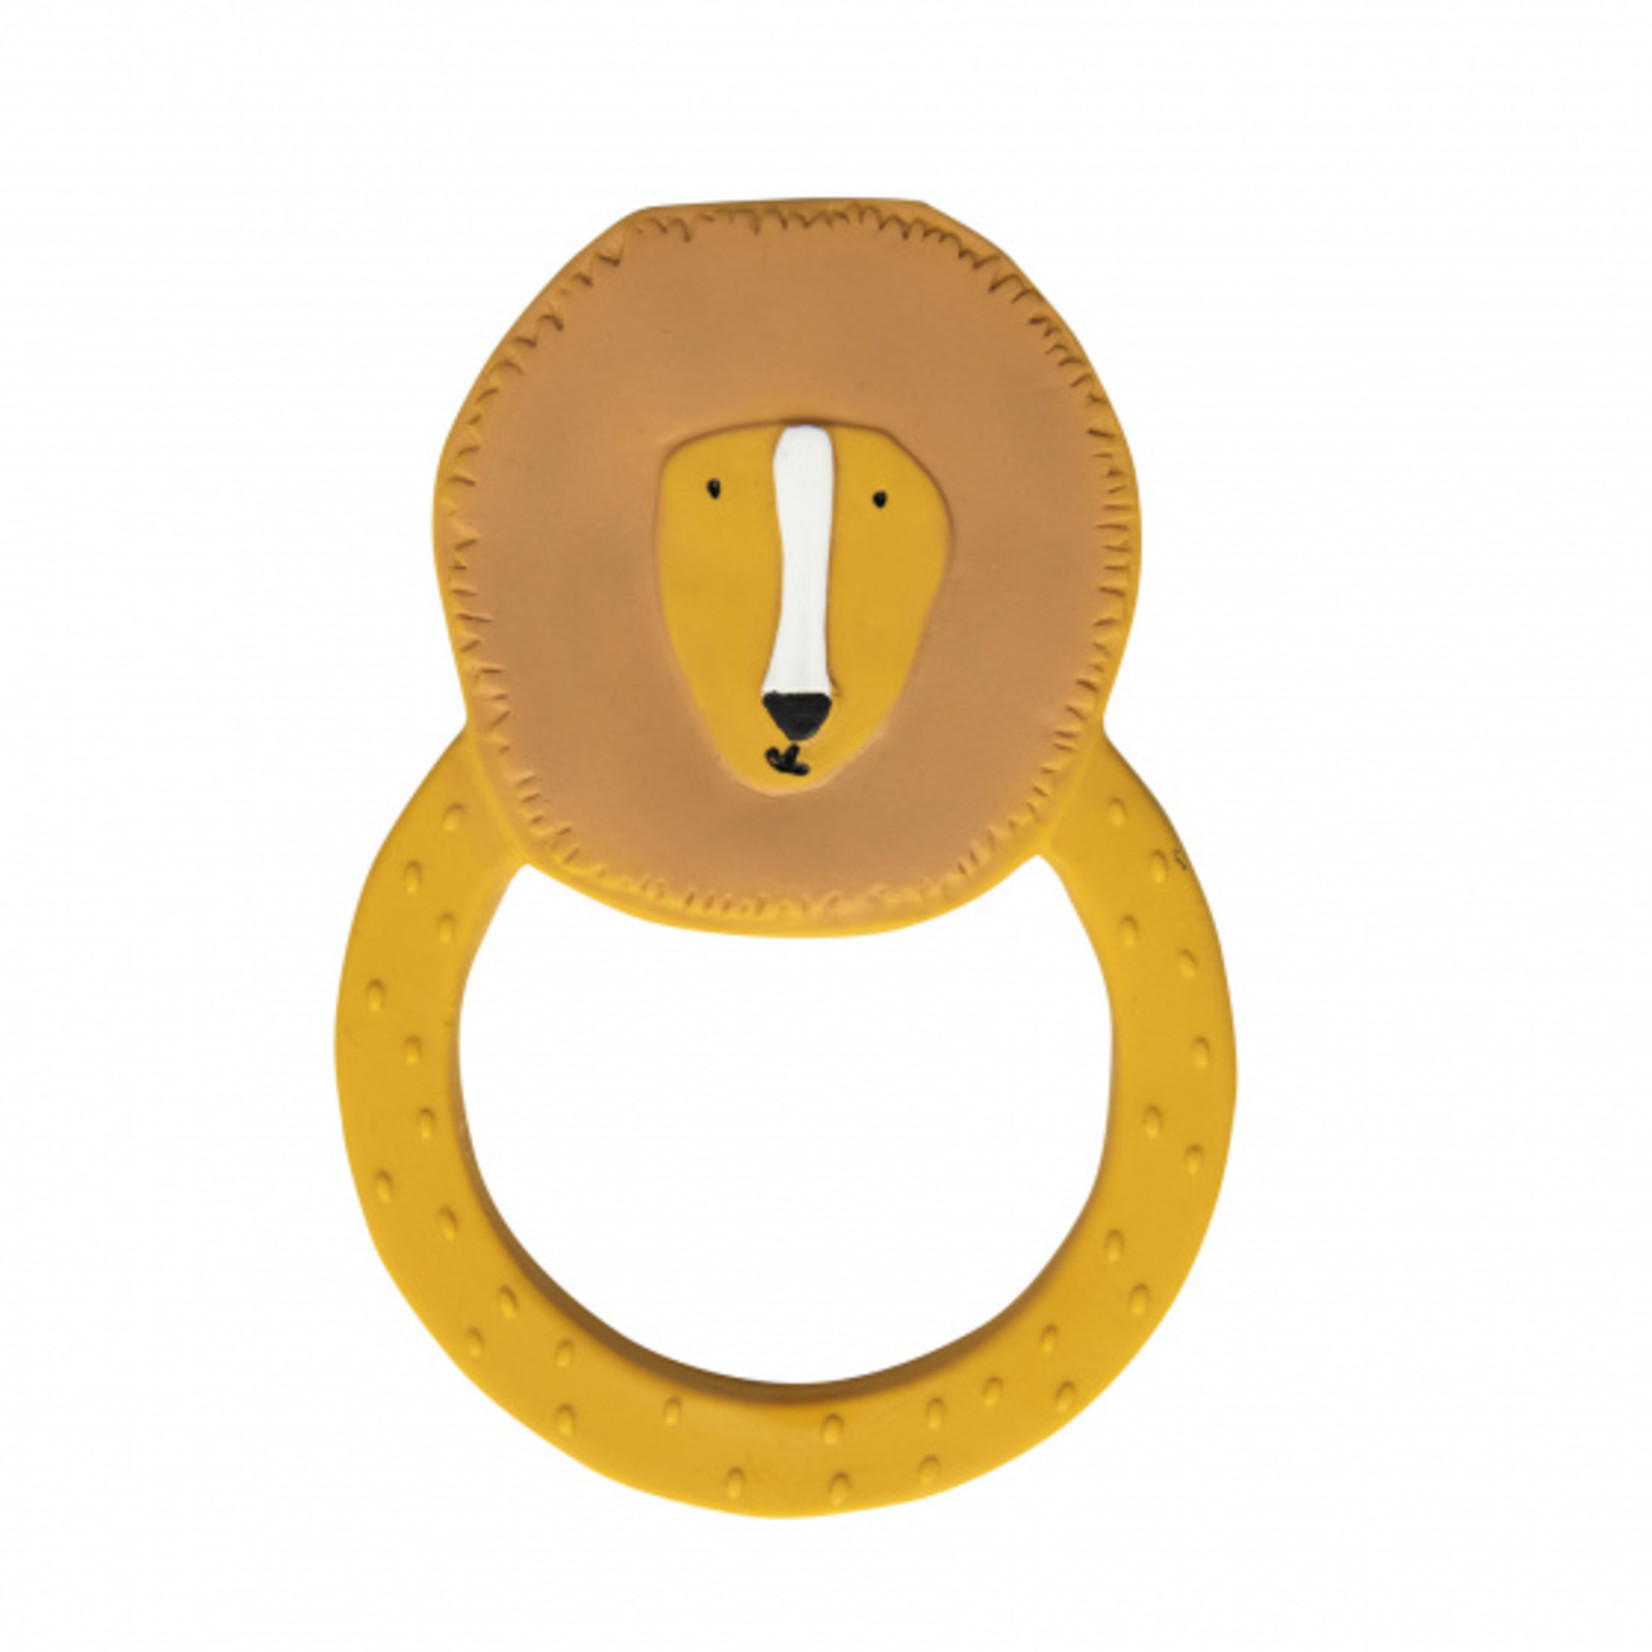 Trixie Natural rubber round teether-Mr. Lion